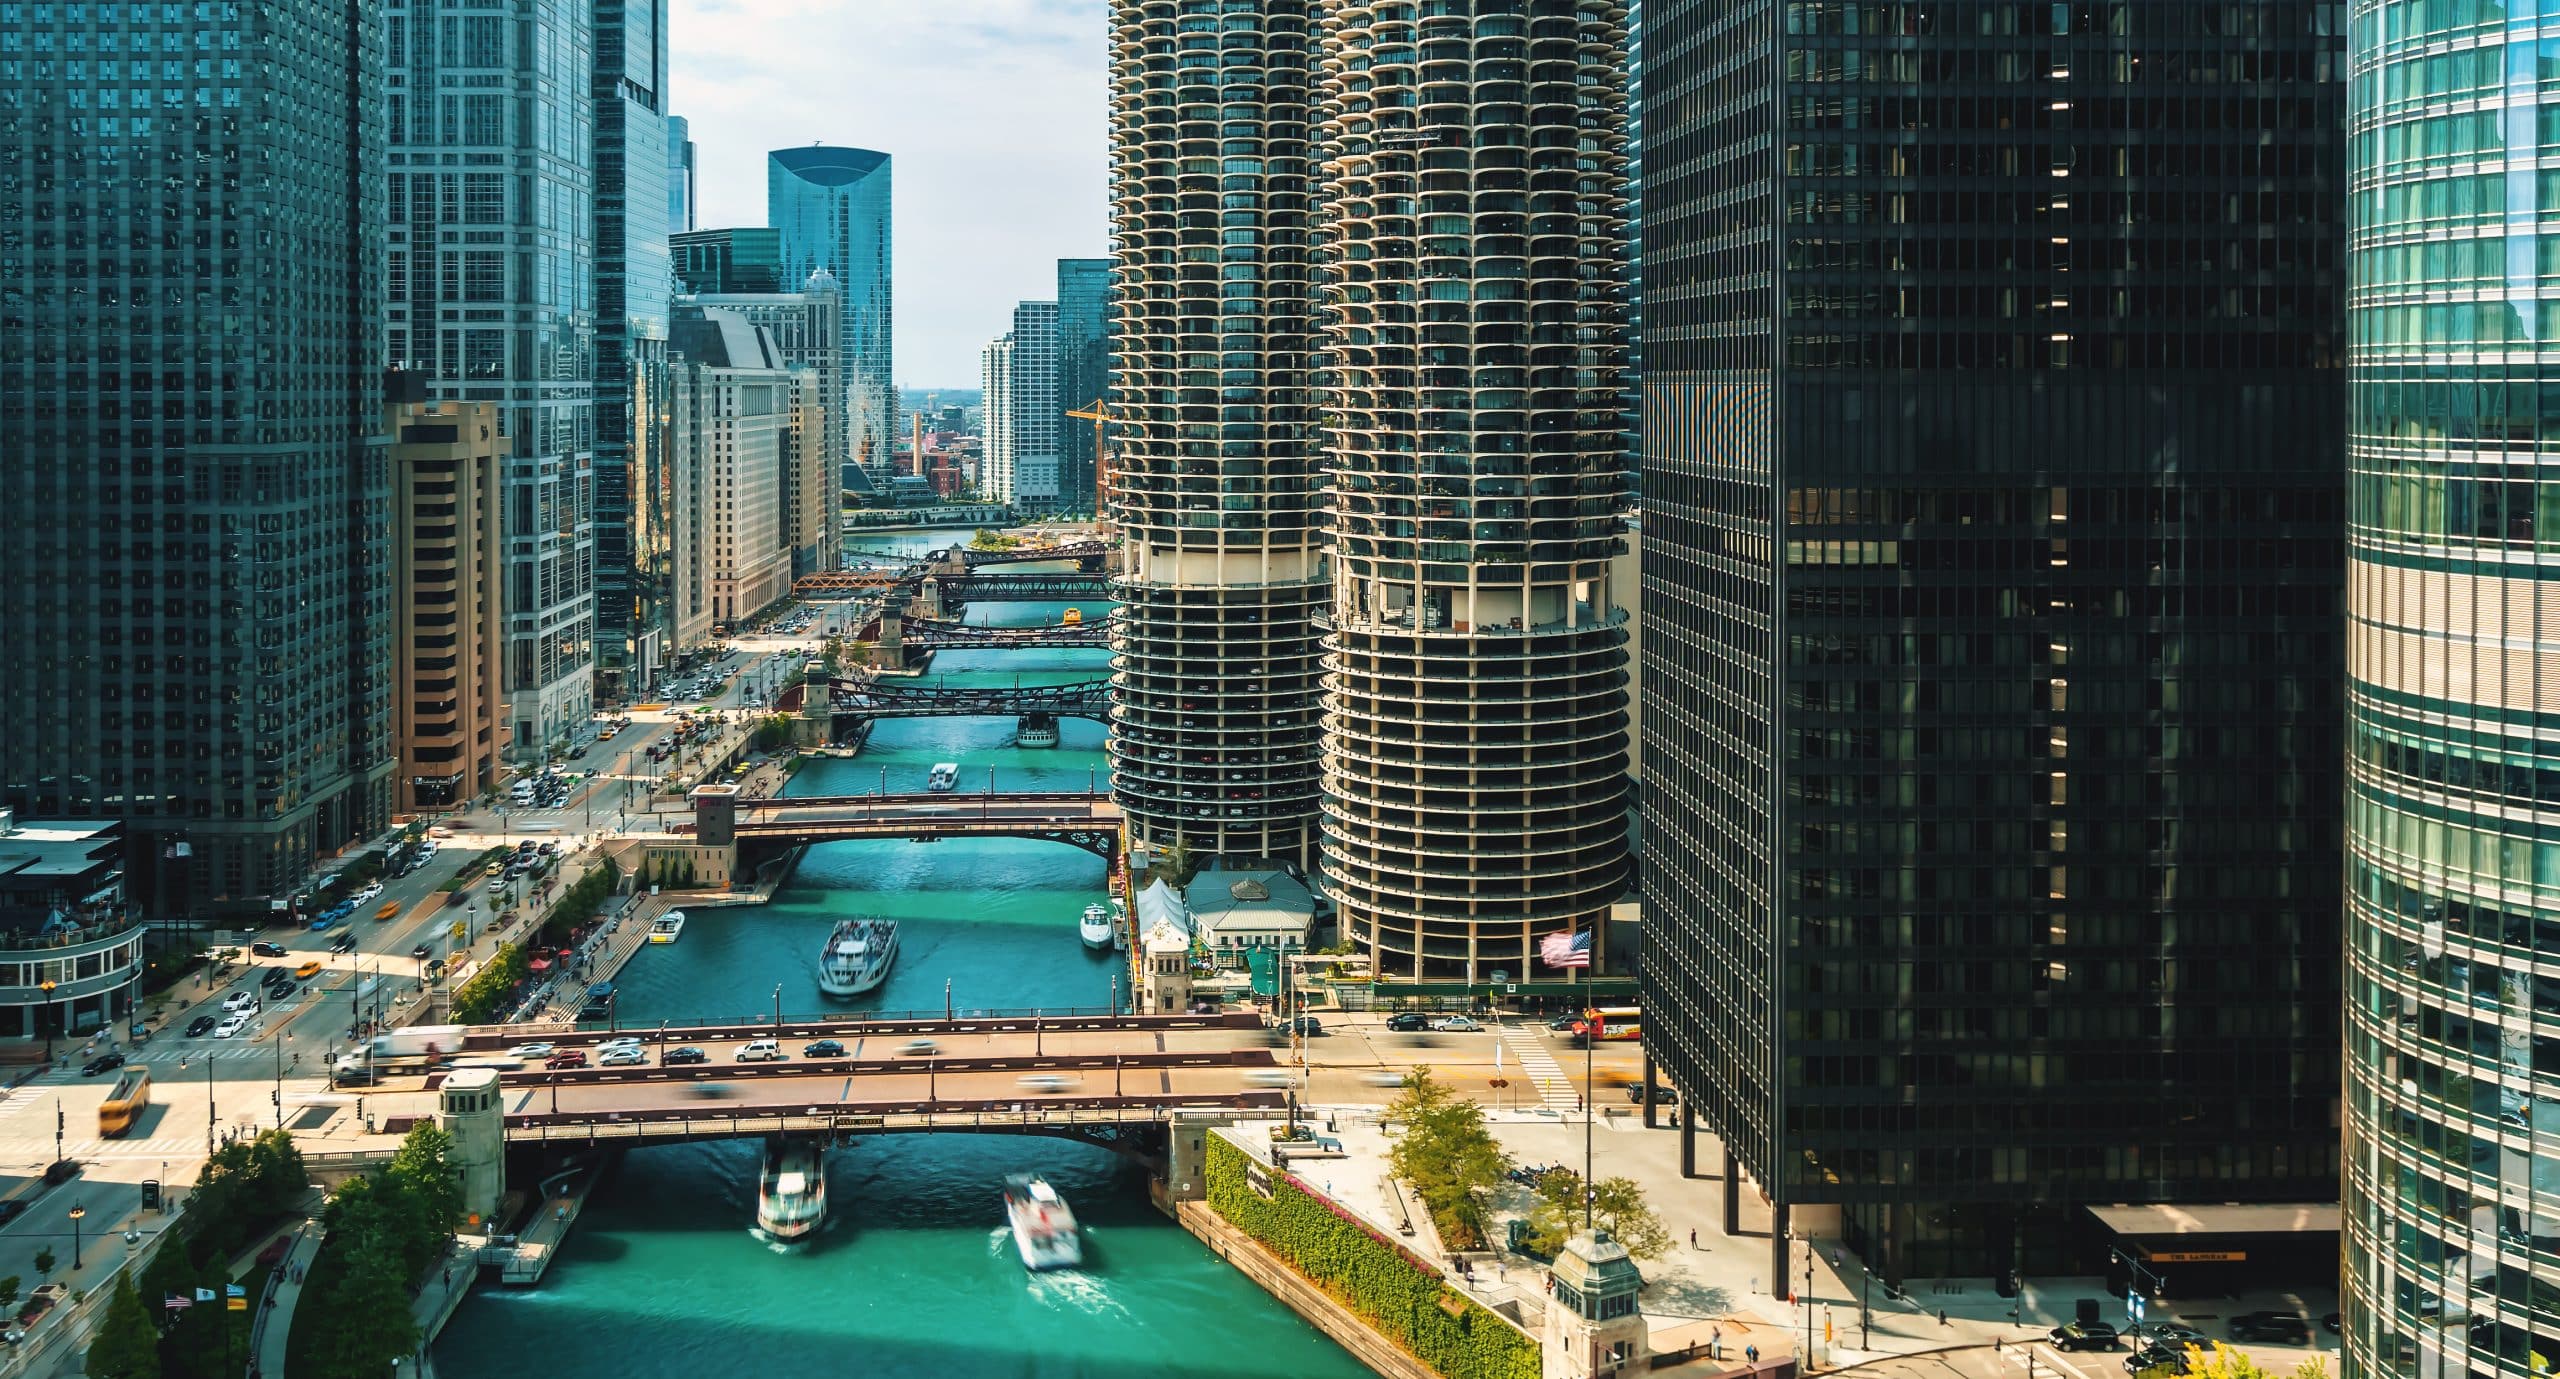 Chicago partnered with LightBox and local consulting and engineering firms to help it facilitate the environmental assessment of 10,000 lots of city-owned vacant land